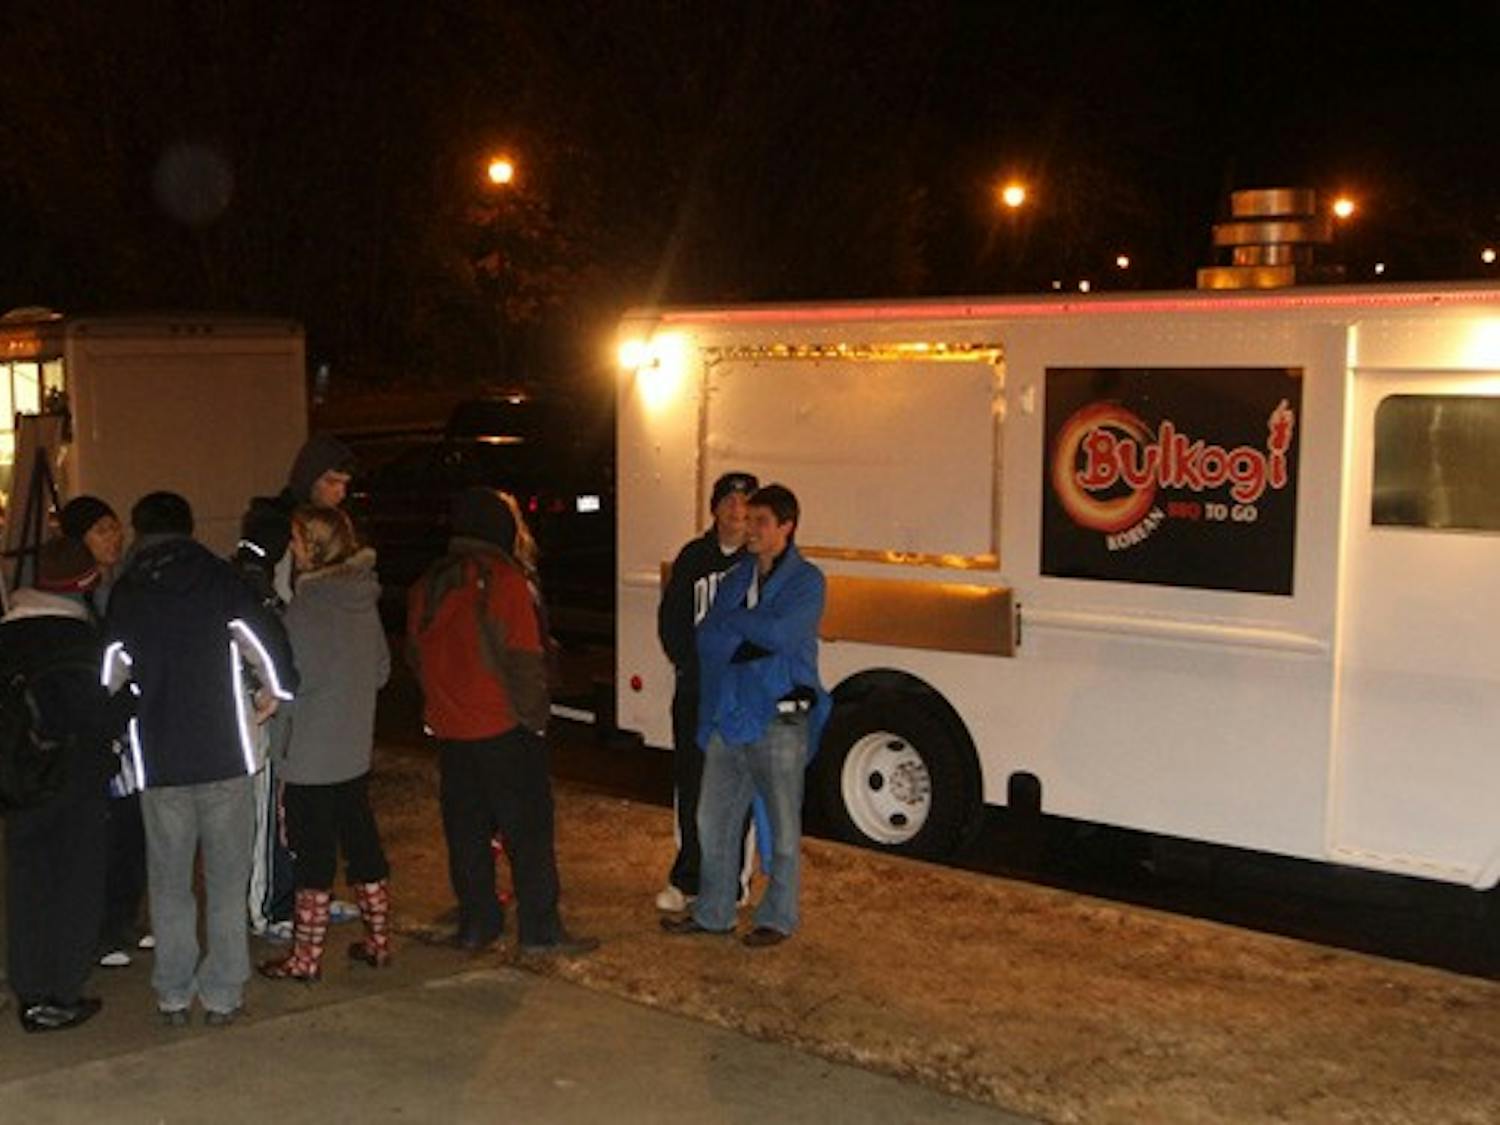 Bulkogi Korean BBQ truck and Parlez-Vous Crepe truck park in the Card Lot at midnight to serve hungry tenters in K-ville.